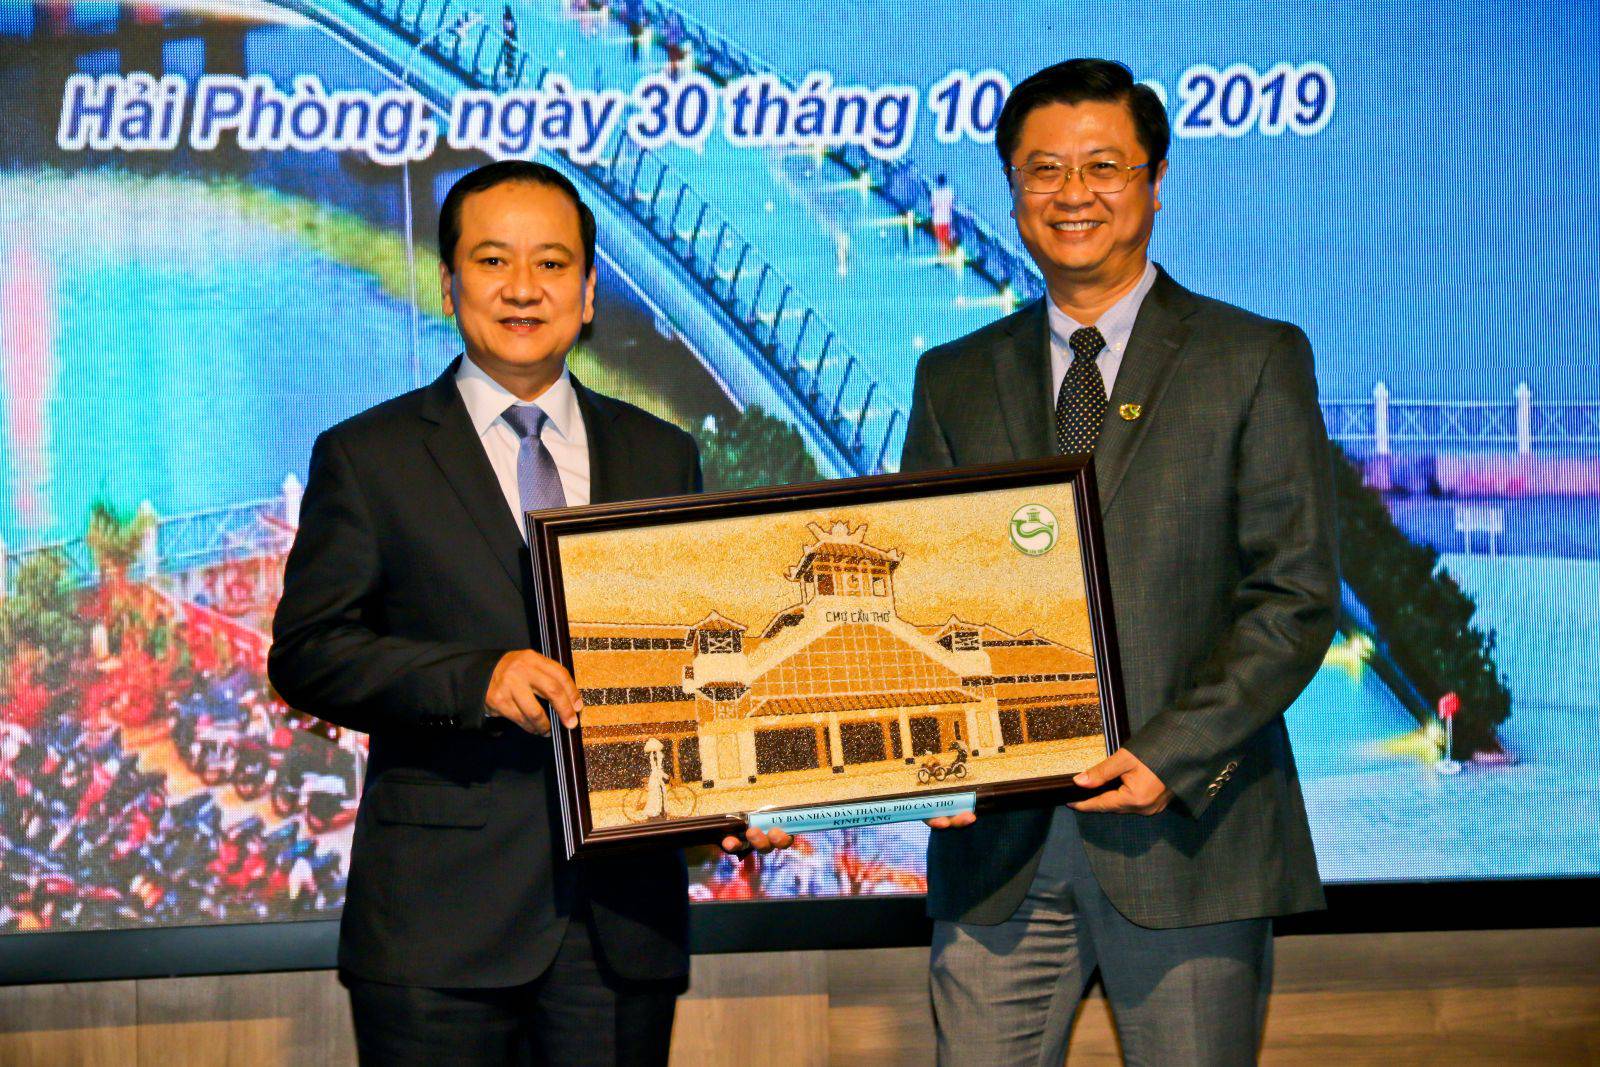 Connecting tourism development in Can Tho and Hai Phong